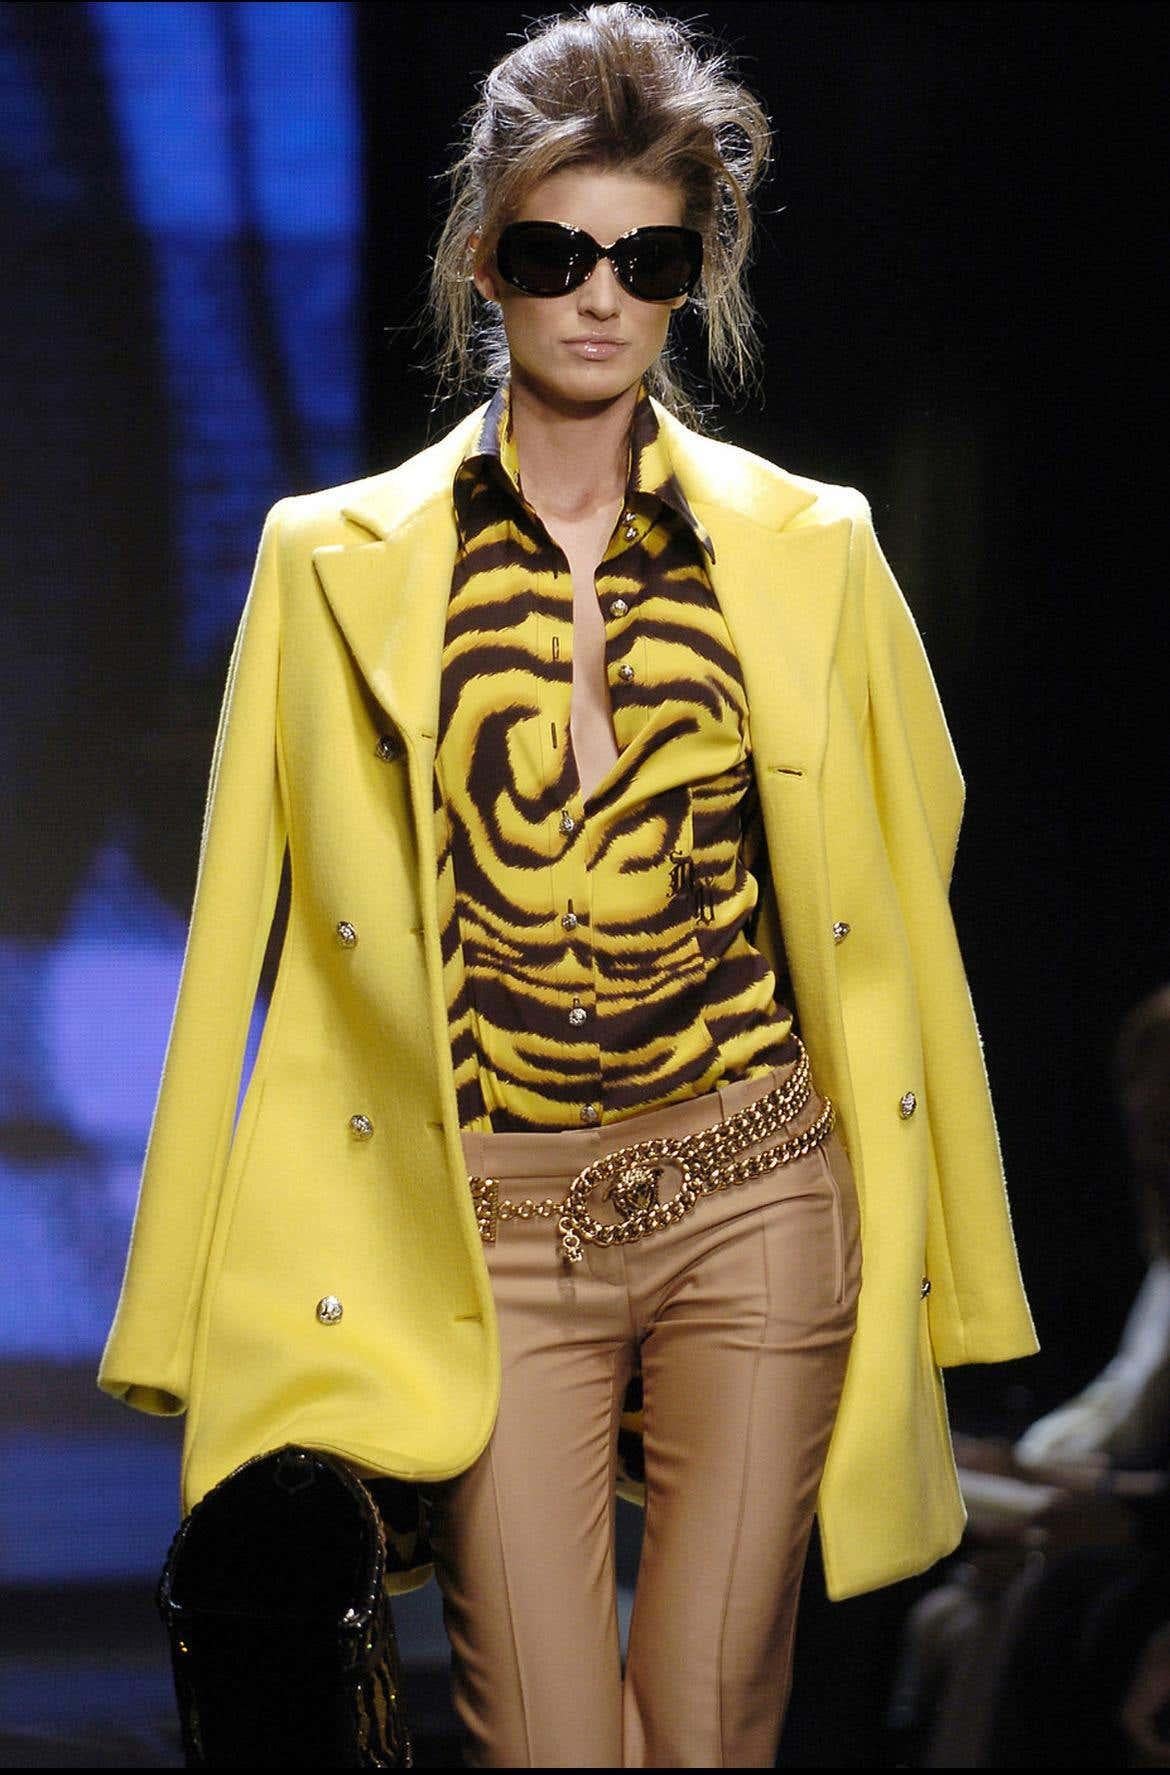 Presenting a beautiful bold yellow and black tiger stripe Versace dress, designed by Donatella Versace. From the Fall/Winter 2004 collection, this beautiful print debuted on the season's runway in several looks. This new with tags form-fitting dress